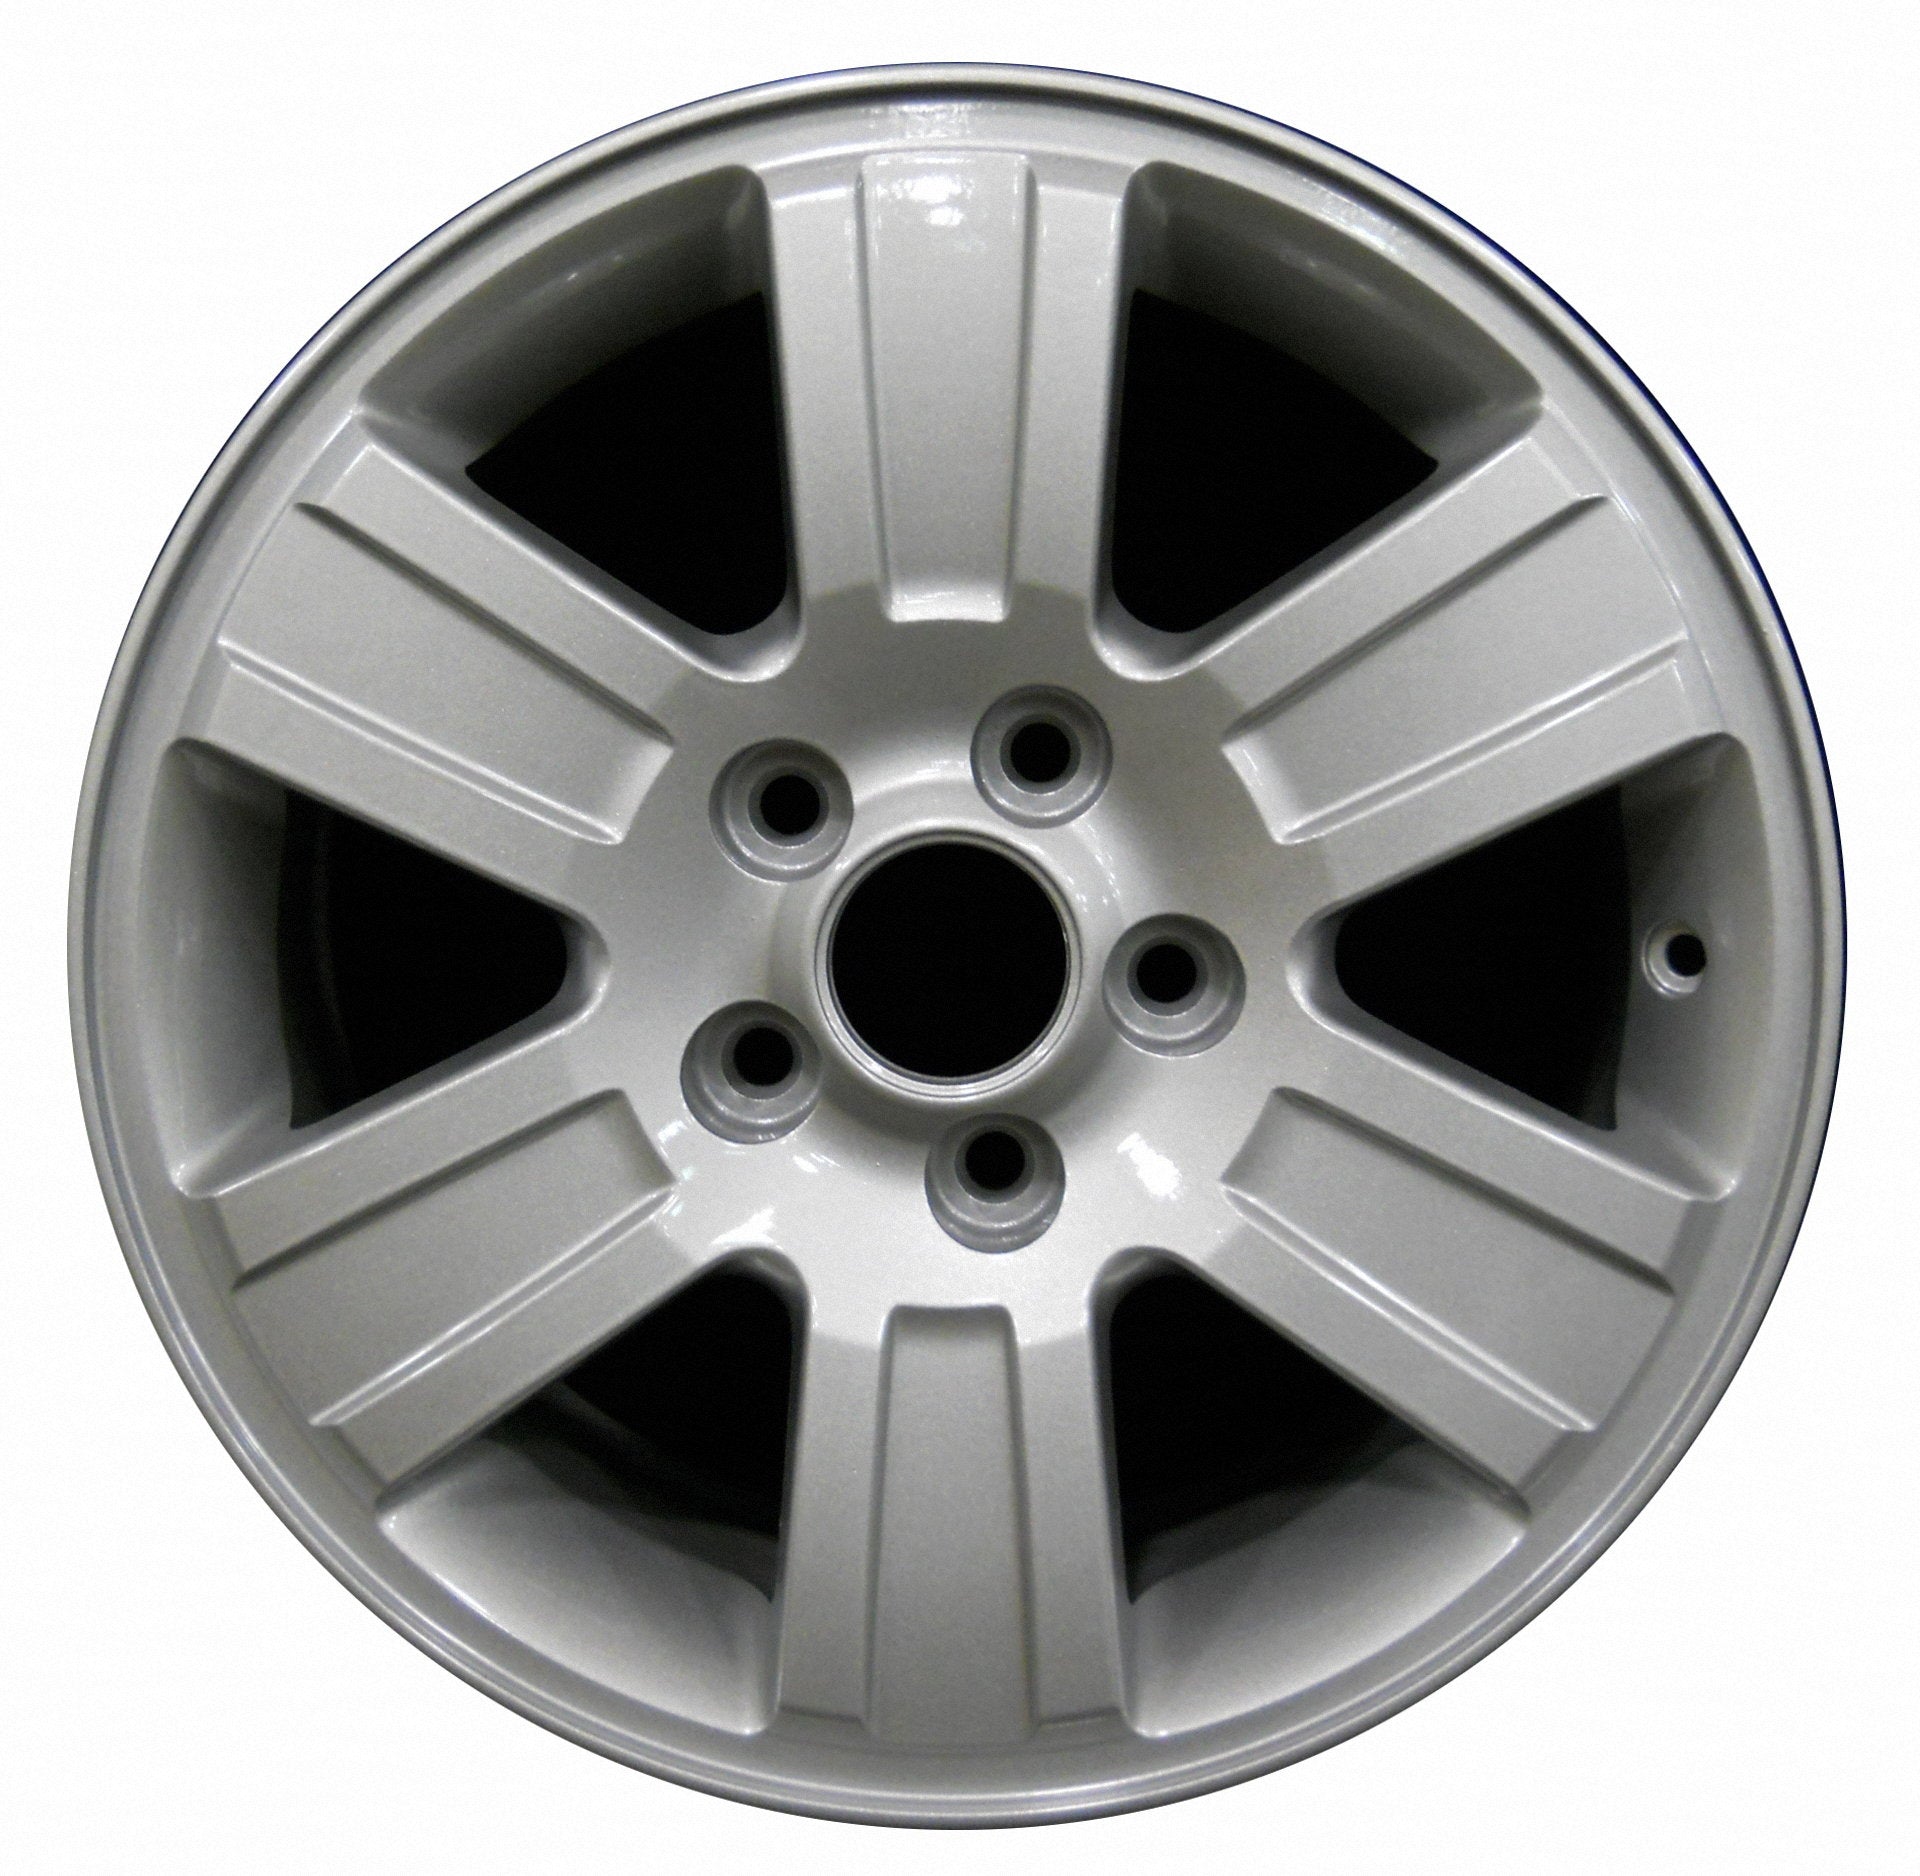 Ford Explorer  2006, 2007, 2008, 2009, 2010 Factory OEM Car Wheel Size 16x7 Alloy WAO.3638.PS02.FF